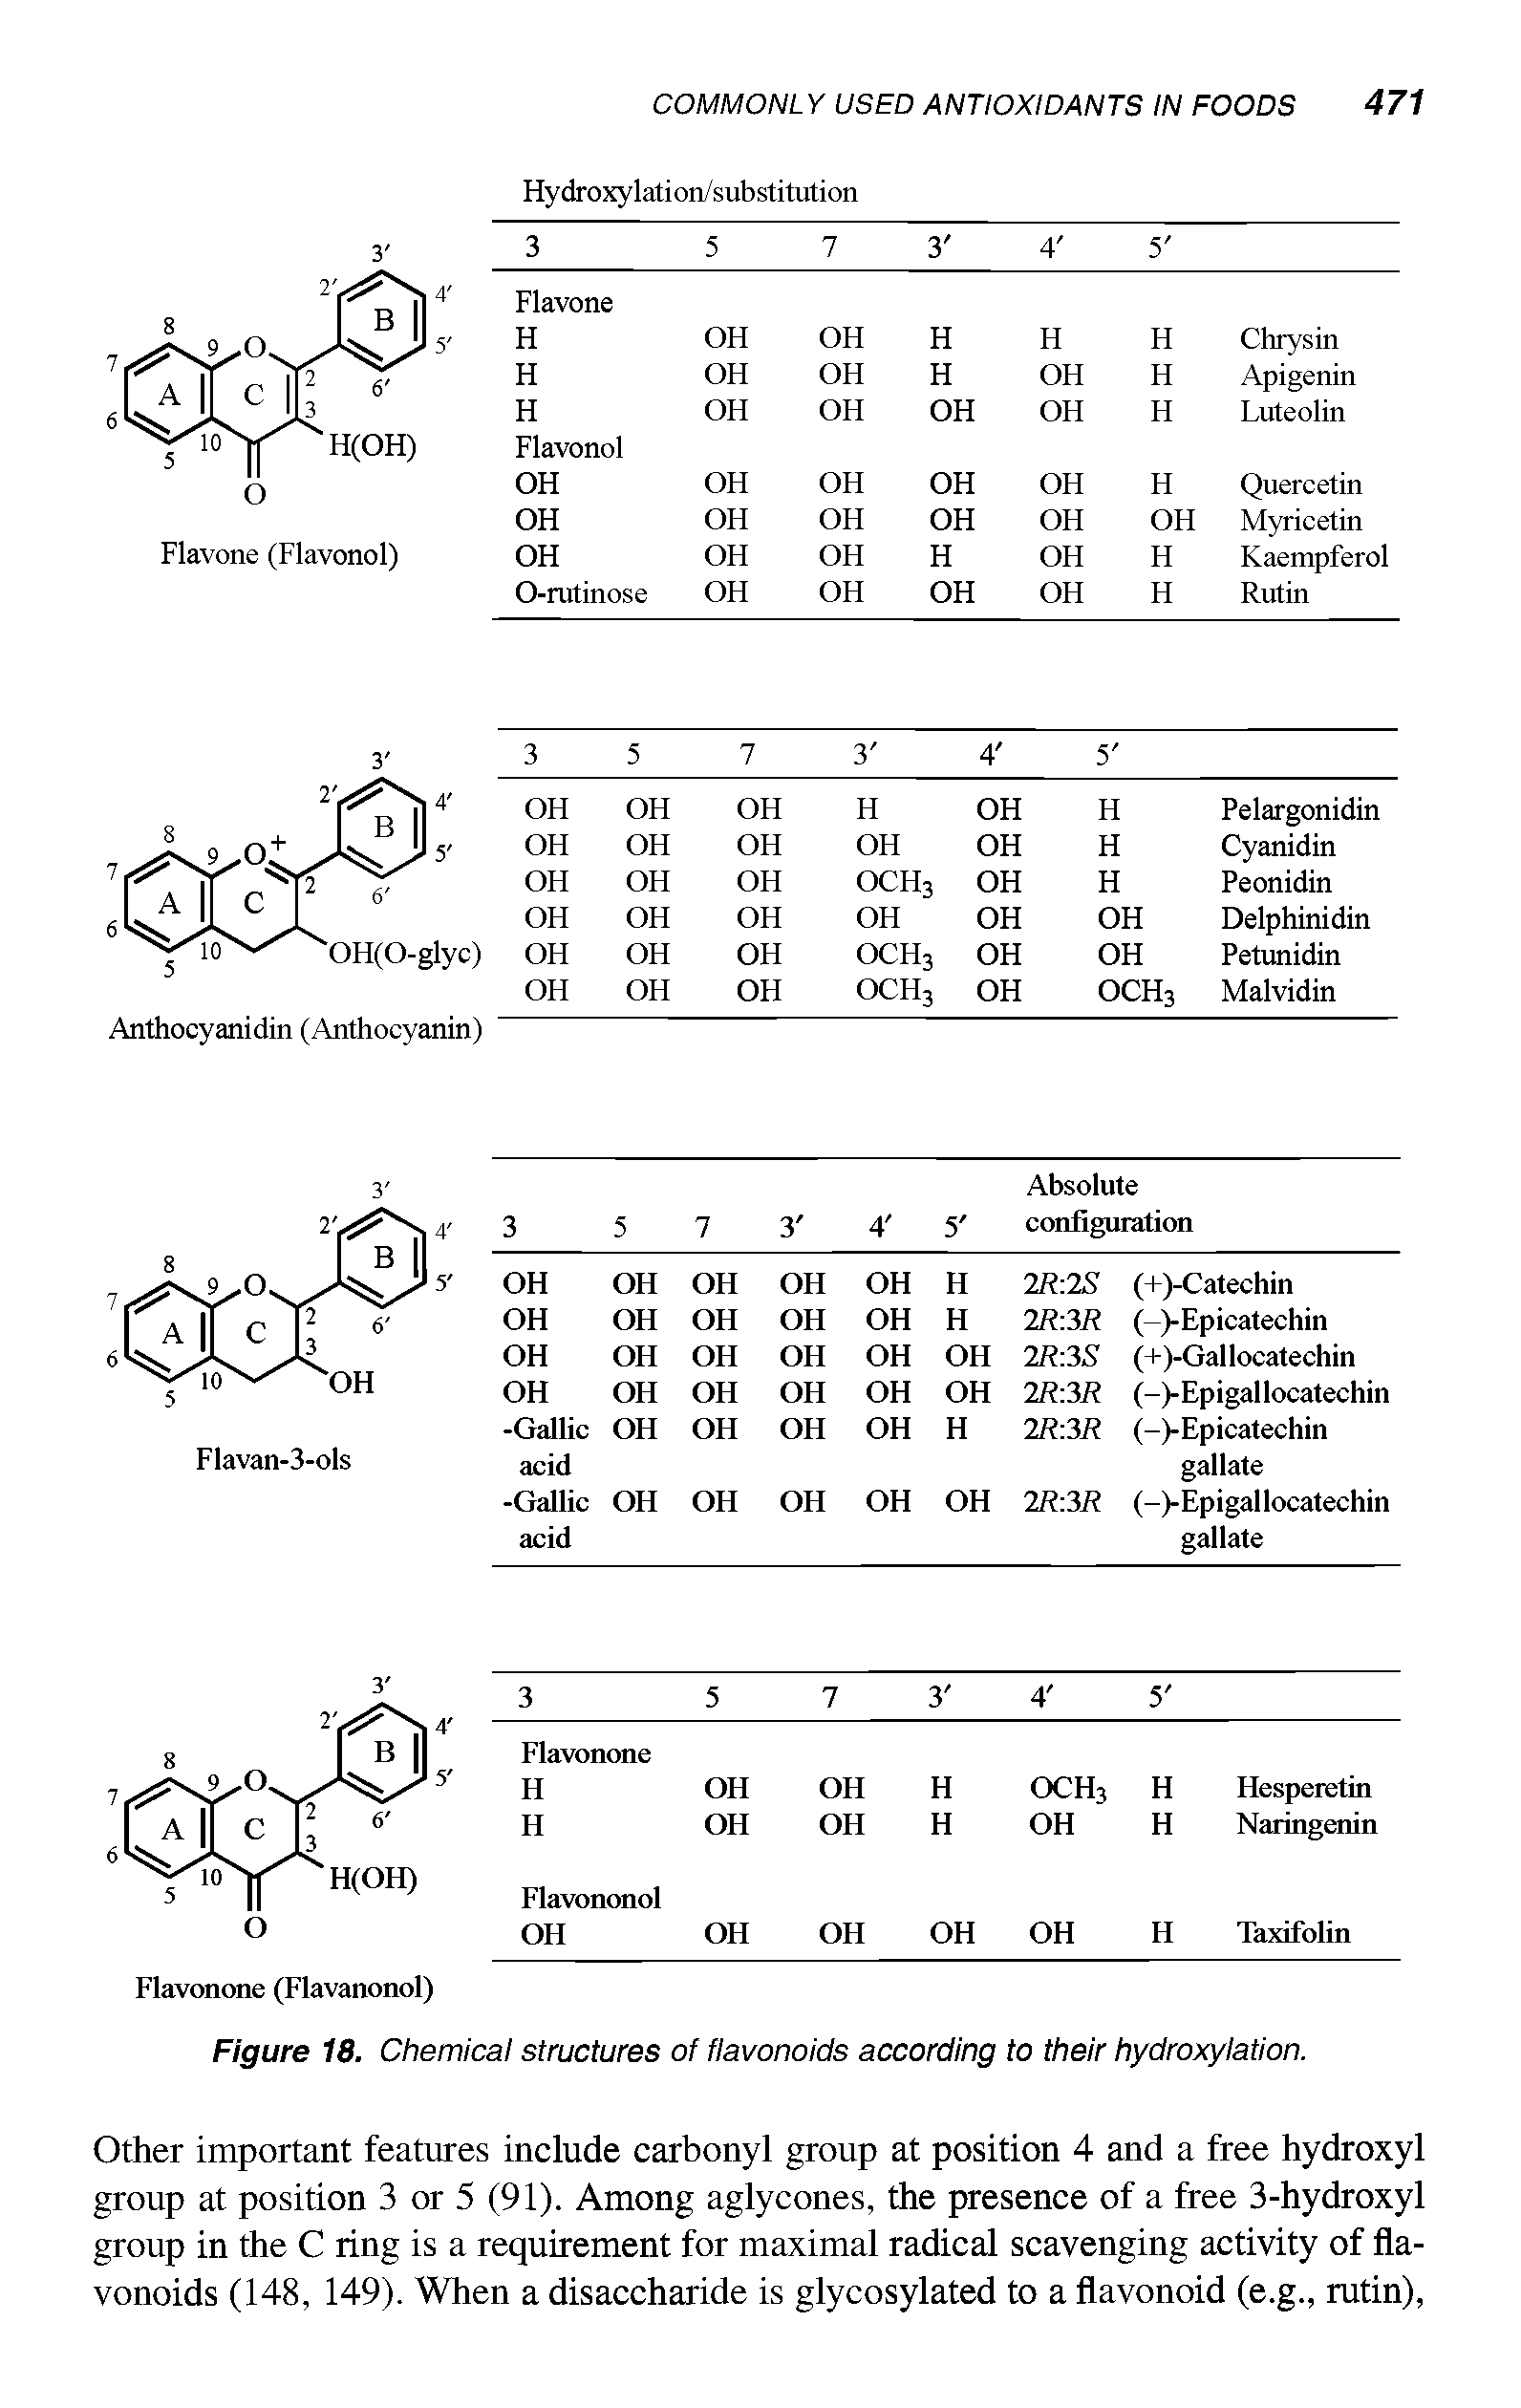 Figure 18. Chemical structures of flavonoids according to their hydroxylation.